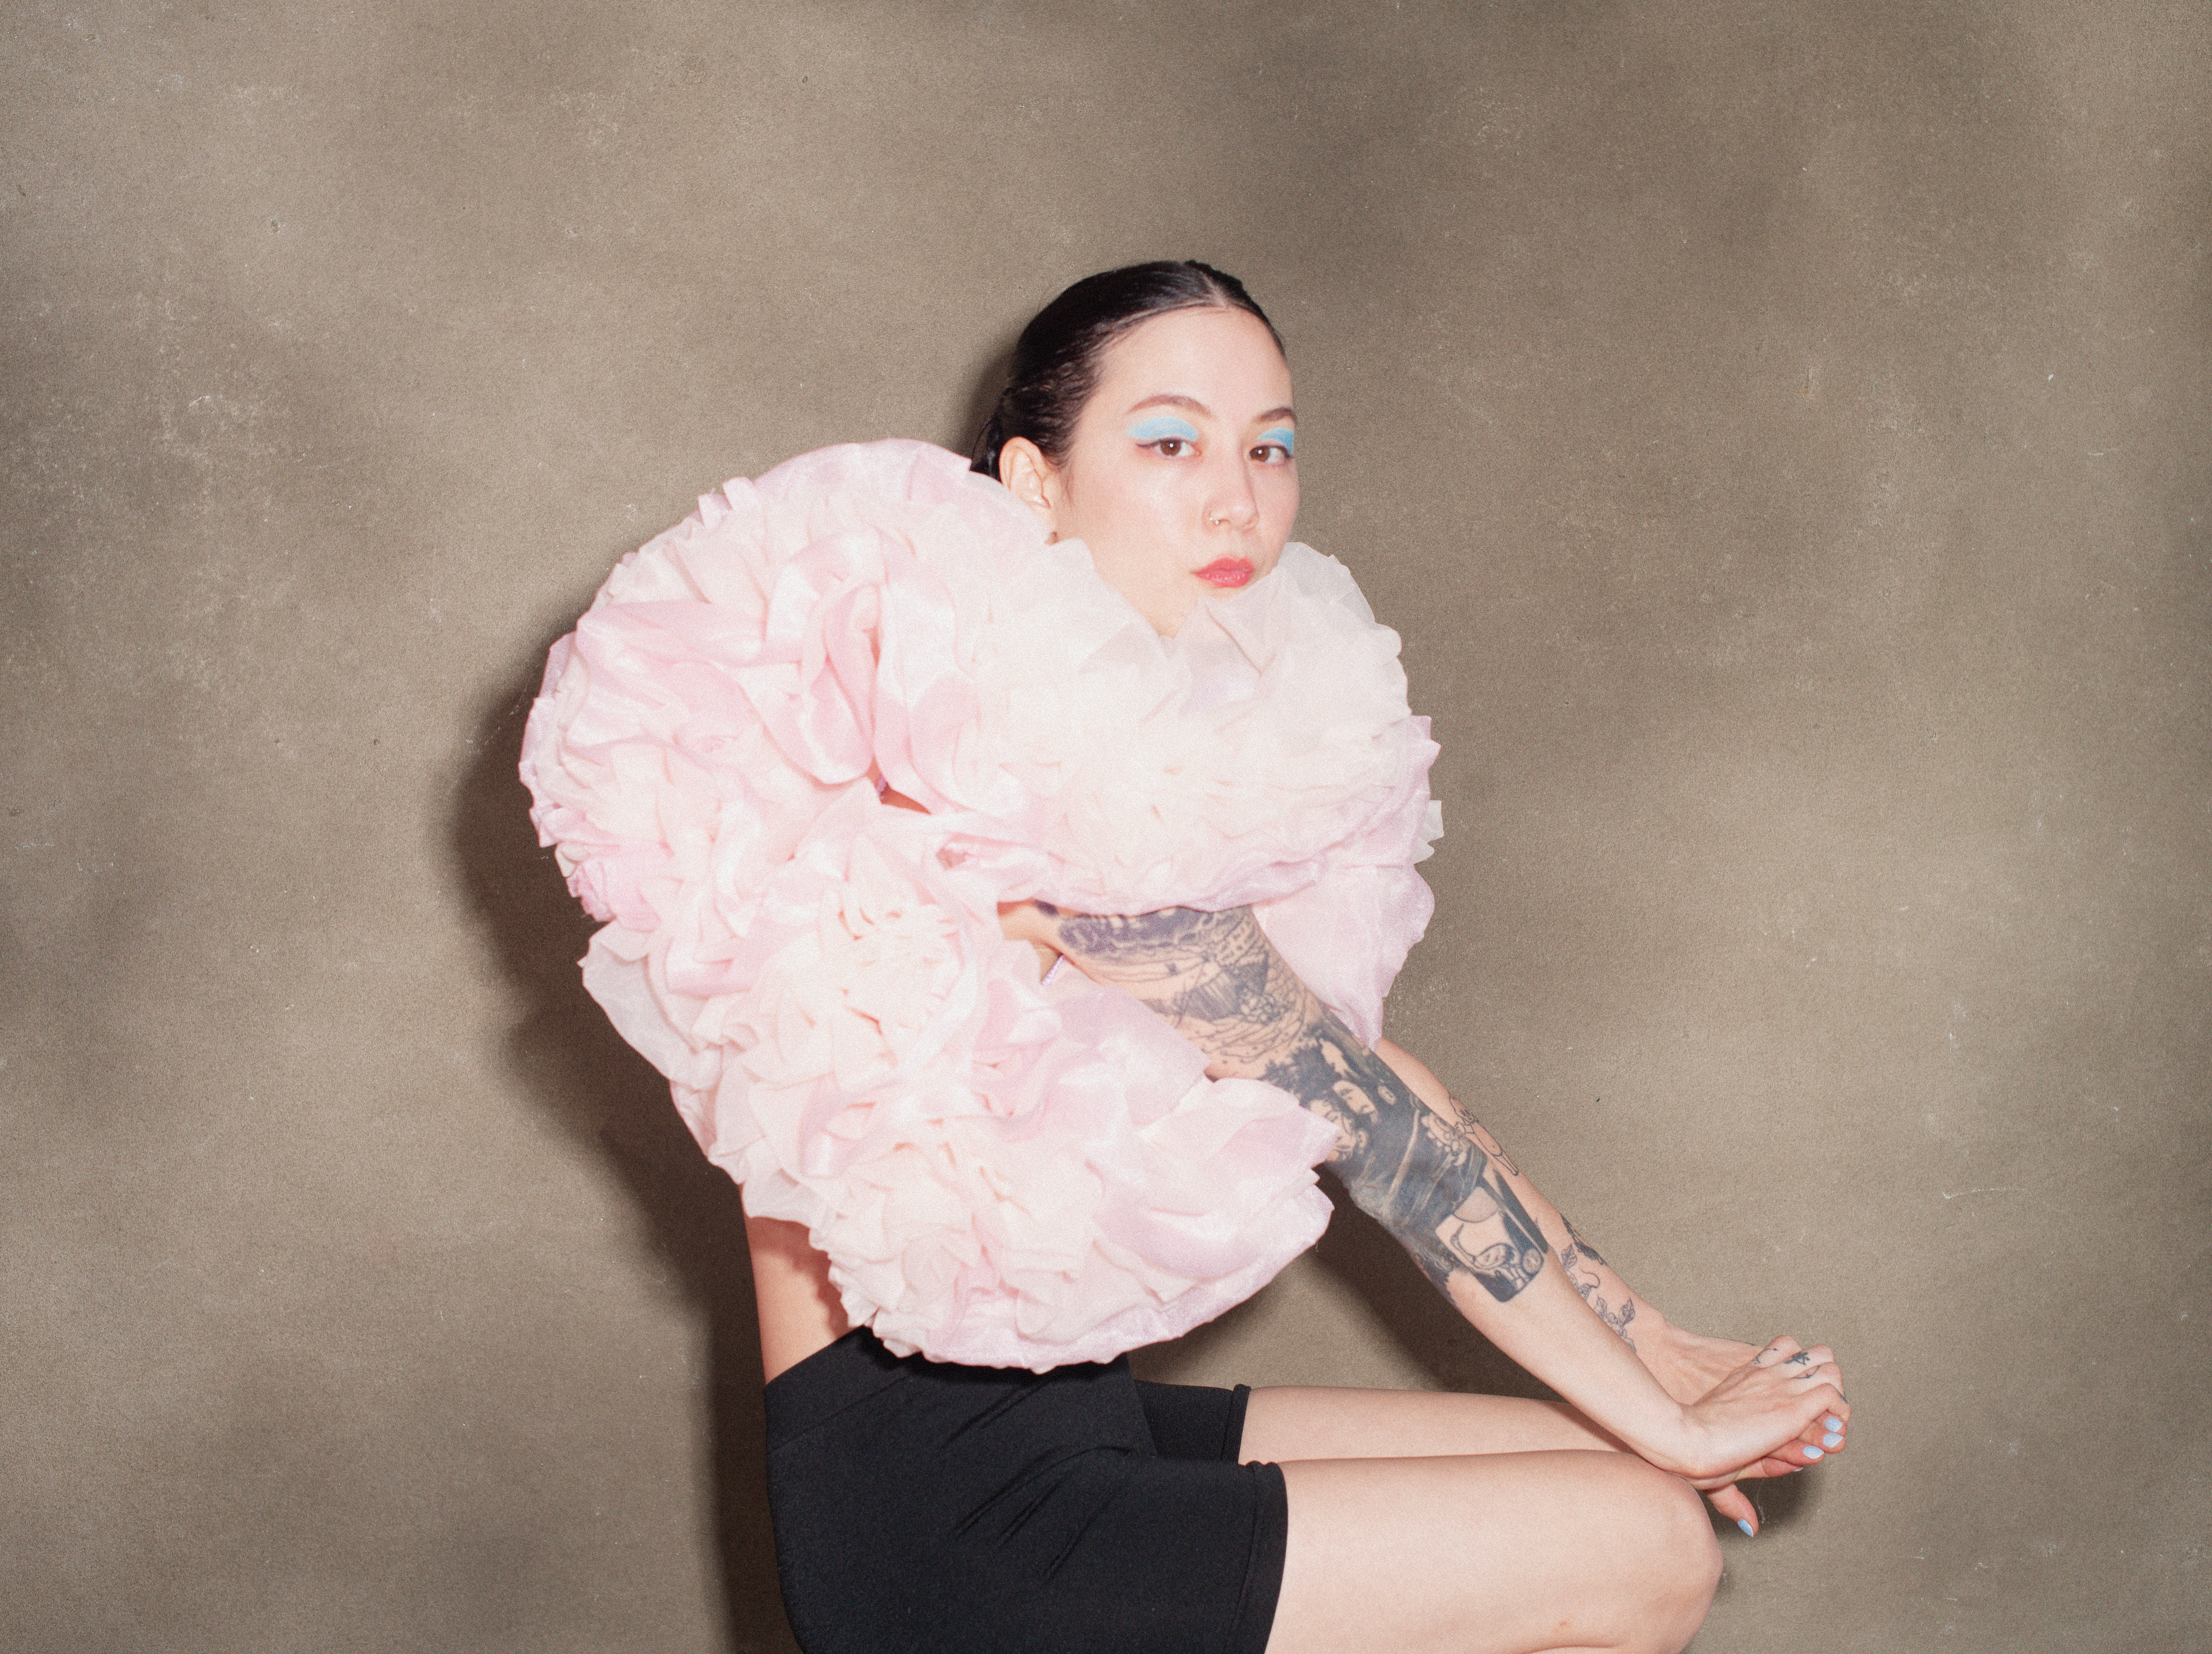 Michelle Zauner, the musical artist known as Japanese Breakfast, sits in a puffy pink top and looks directly at the camera.